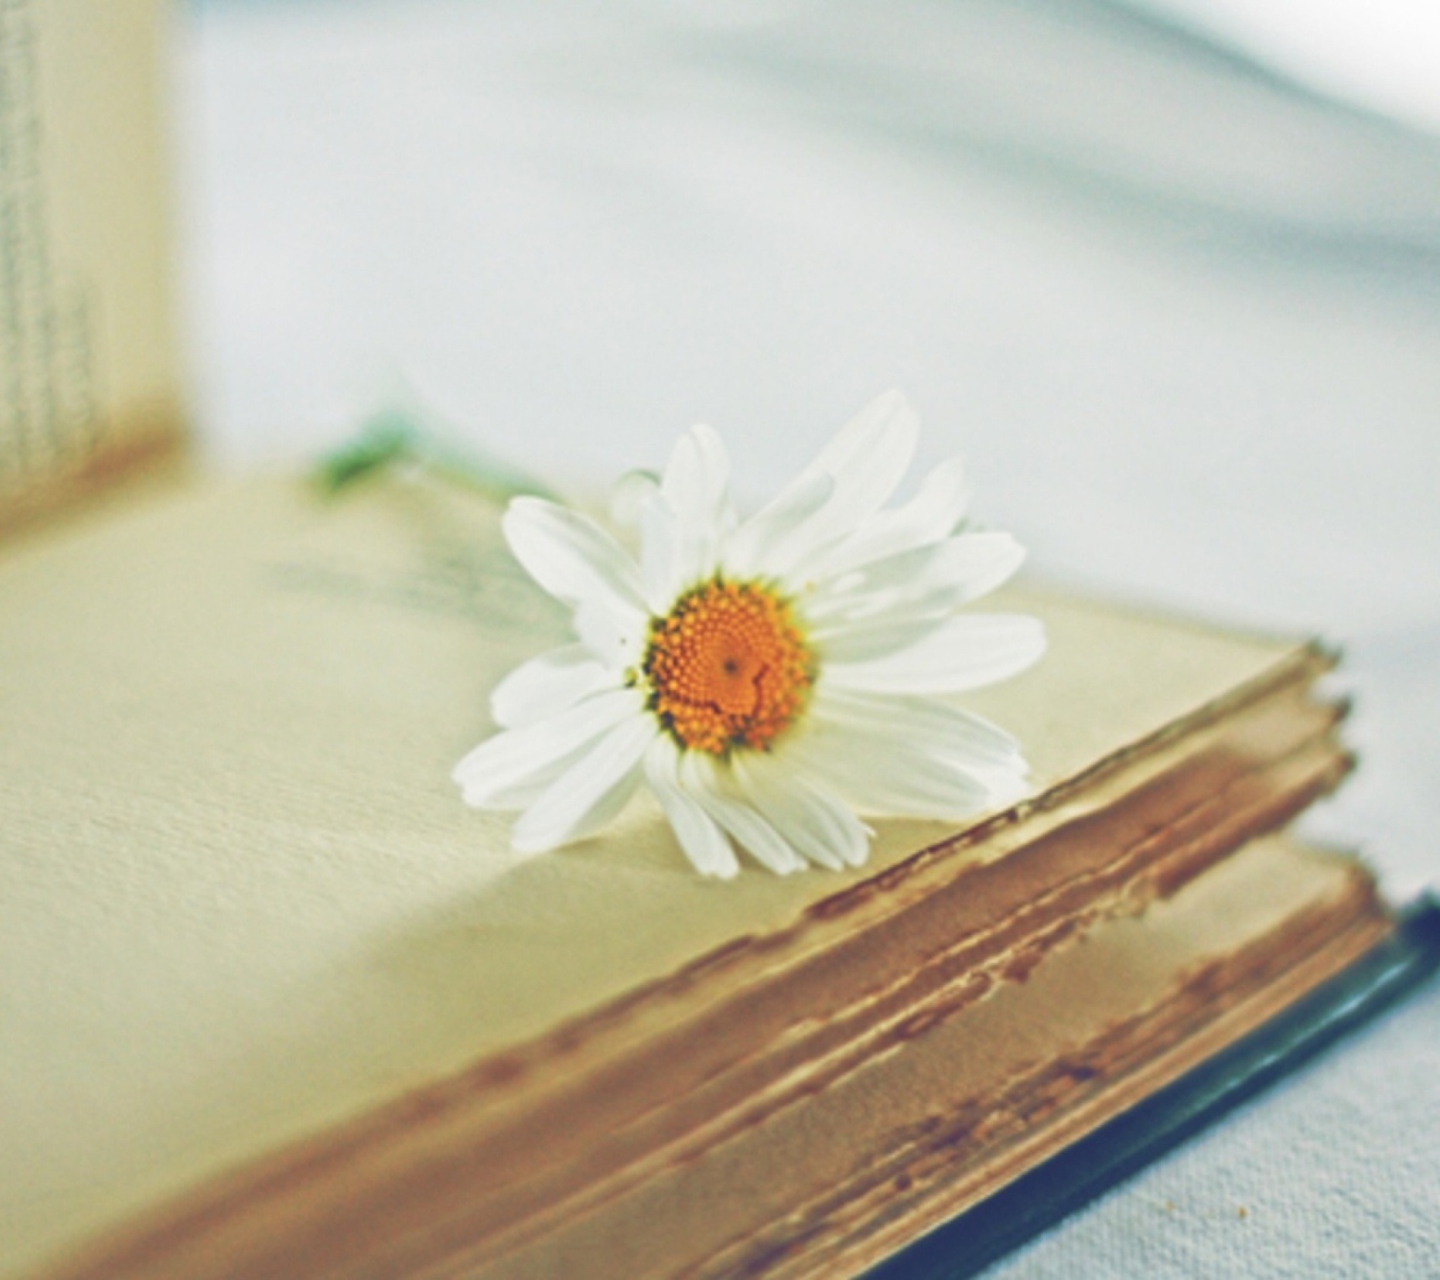 Book And Daisy wallpaper 1440x1280